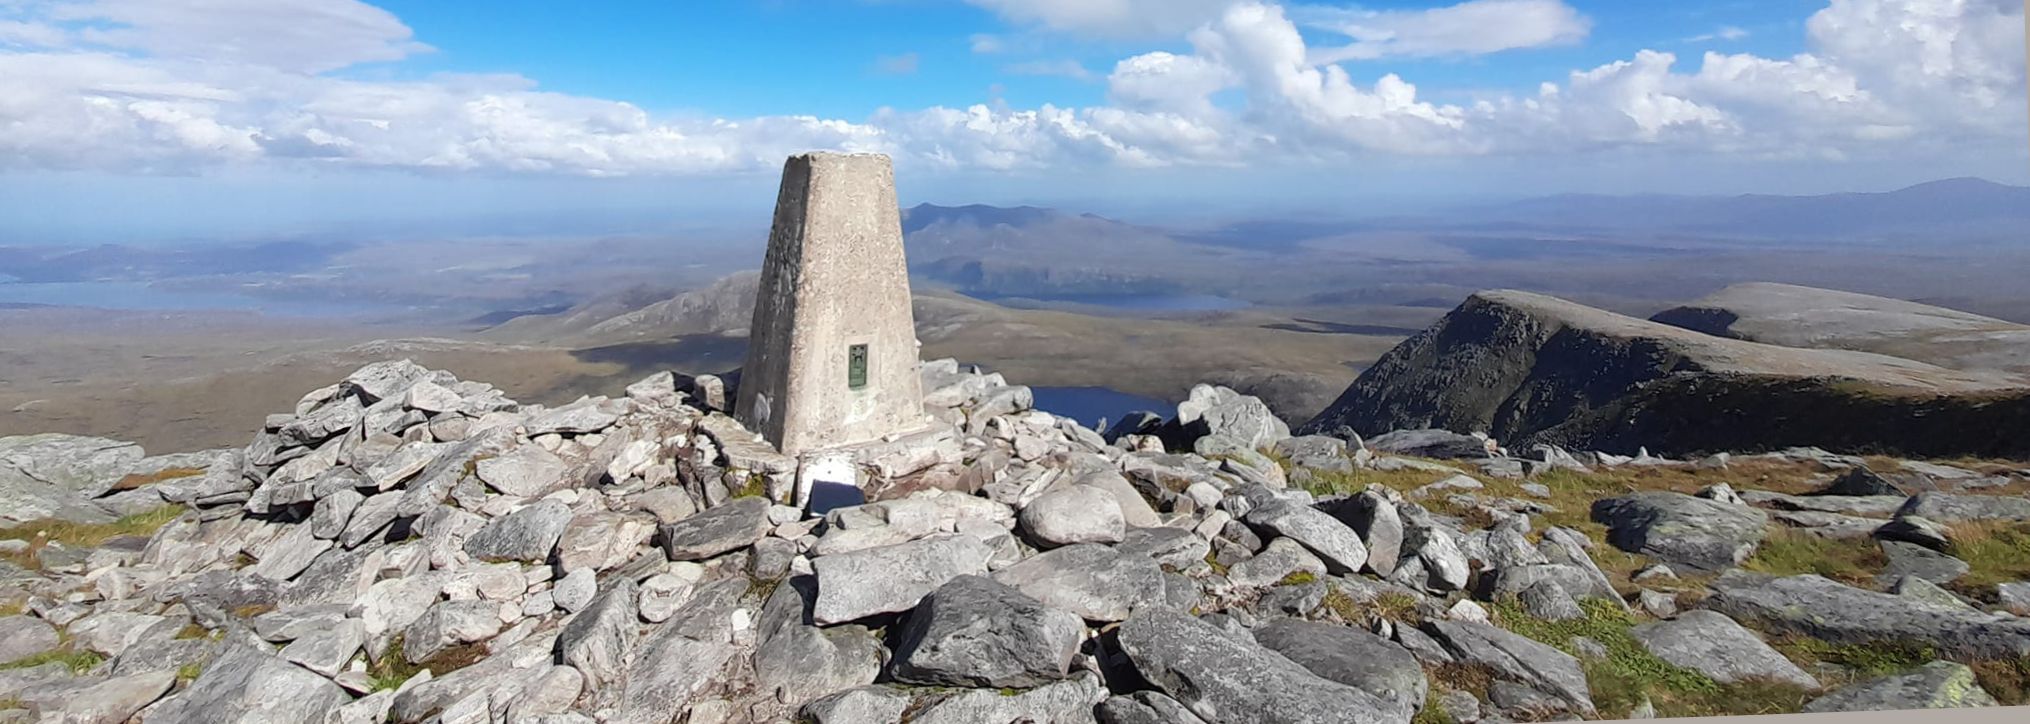 Trig point on summit of Ben Hope